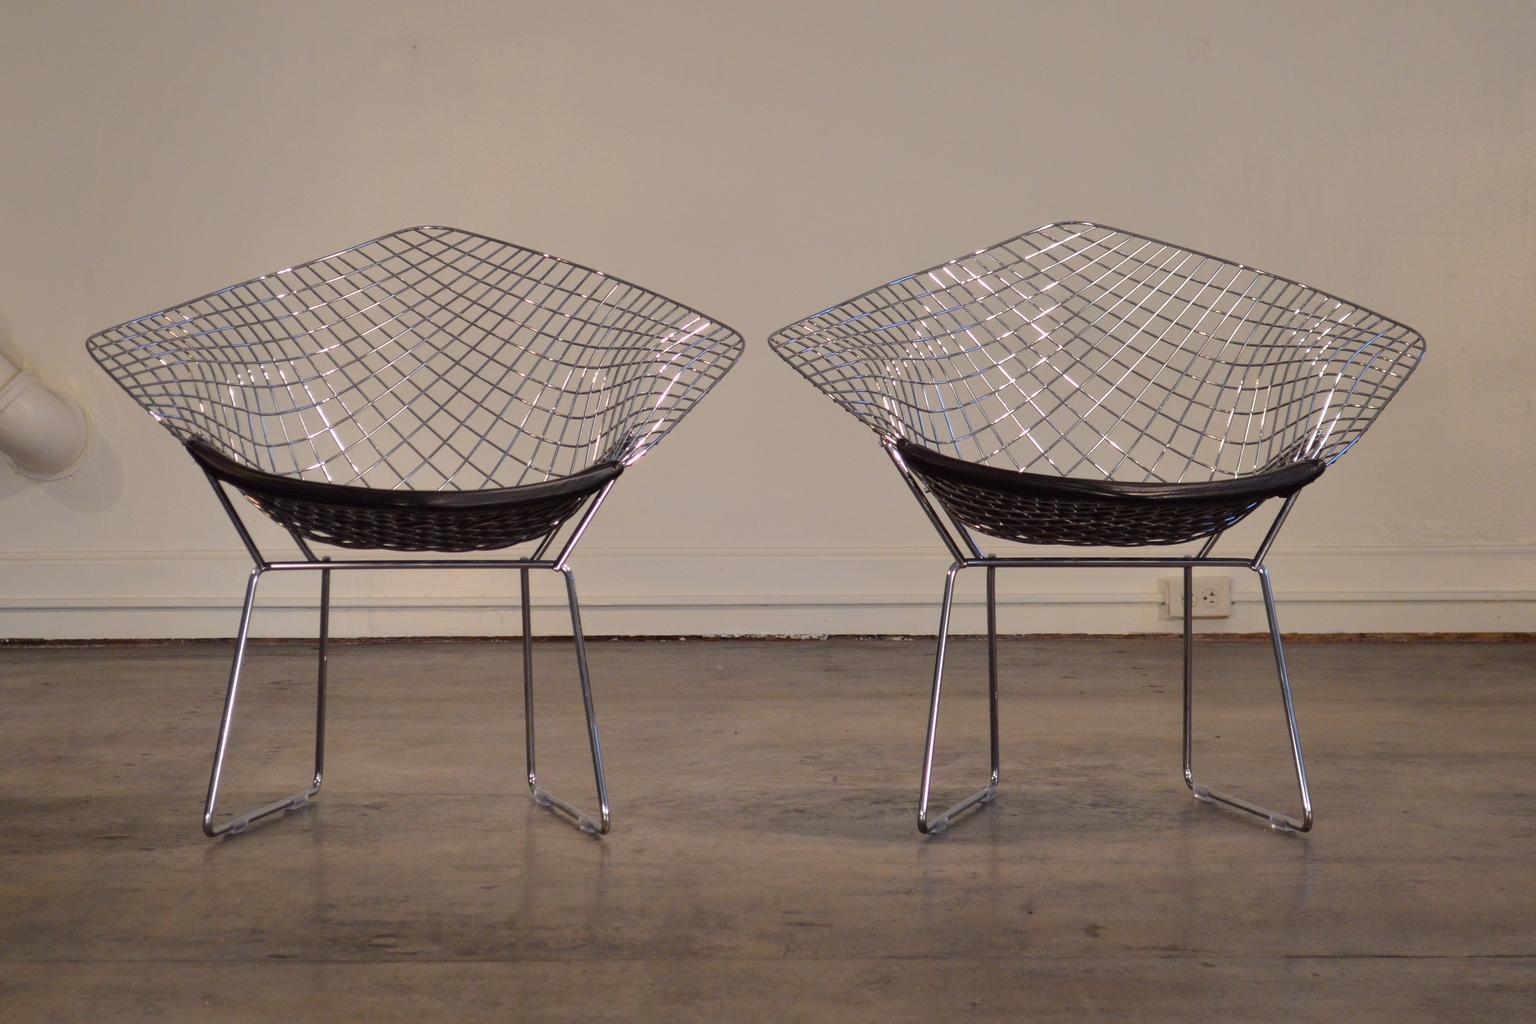 Authentic Harry Bertoia Diamond chairs made by Knoll, circa 1985. Bertoia's wire chair designs are evergreen icons, and the Diamond chair remains distinctive and striking through the decades.

This pair's attributed vintage is 1985 - in years